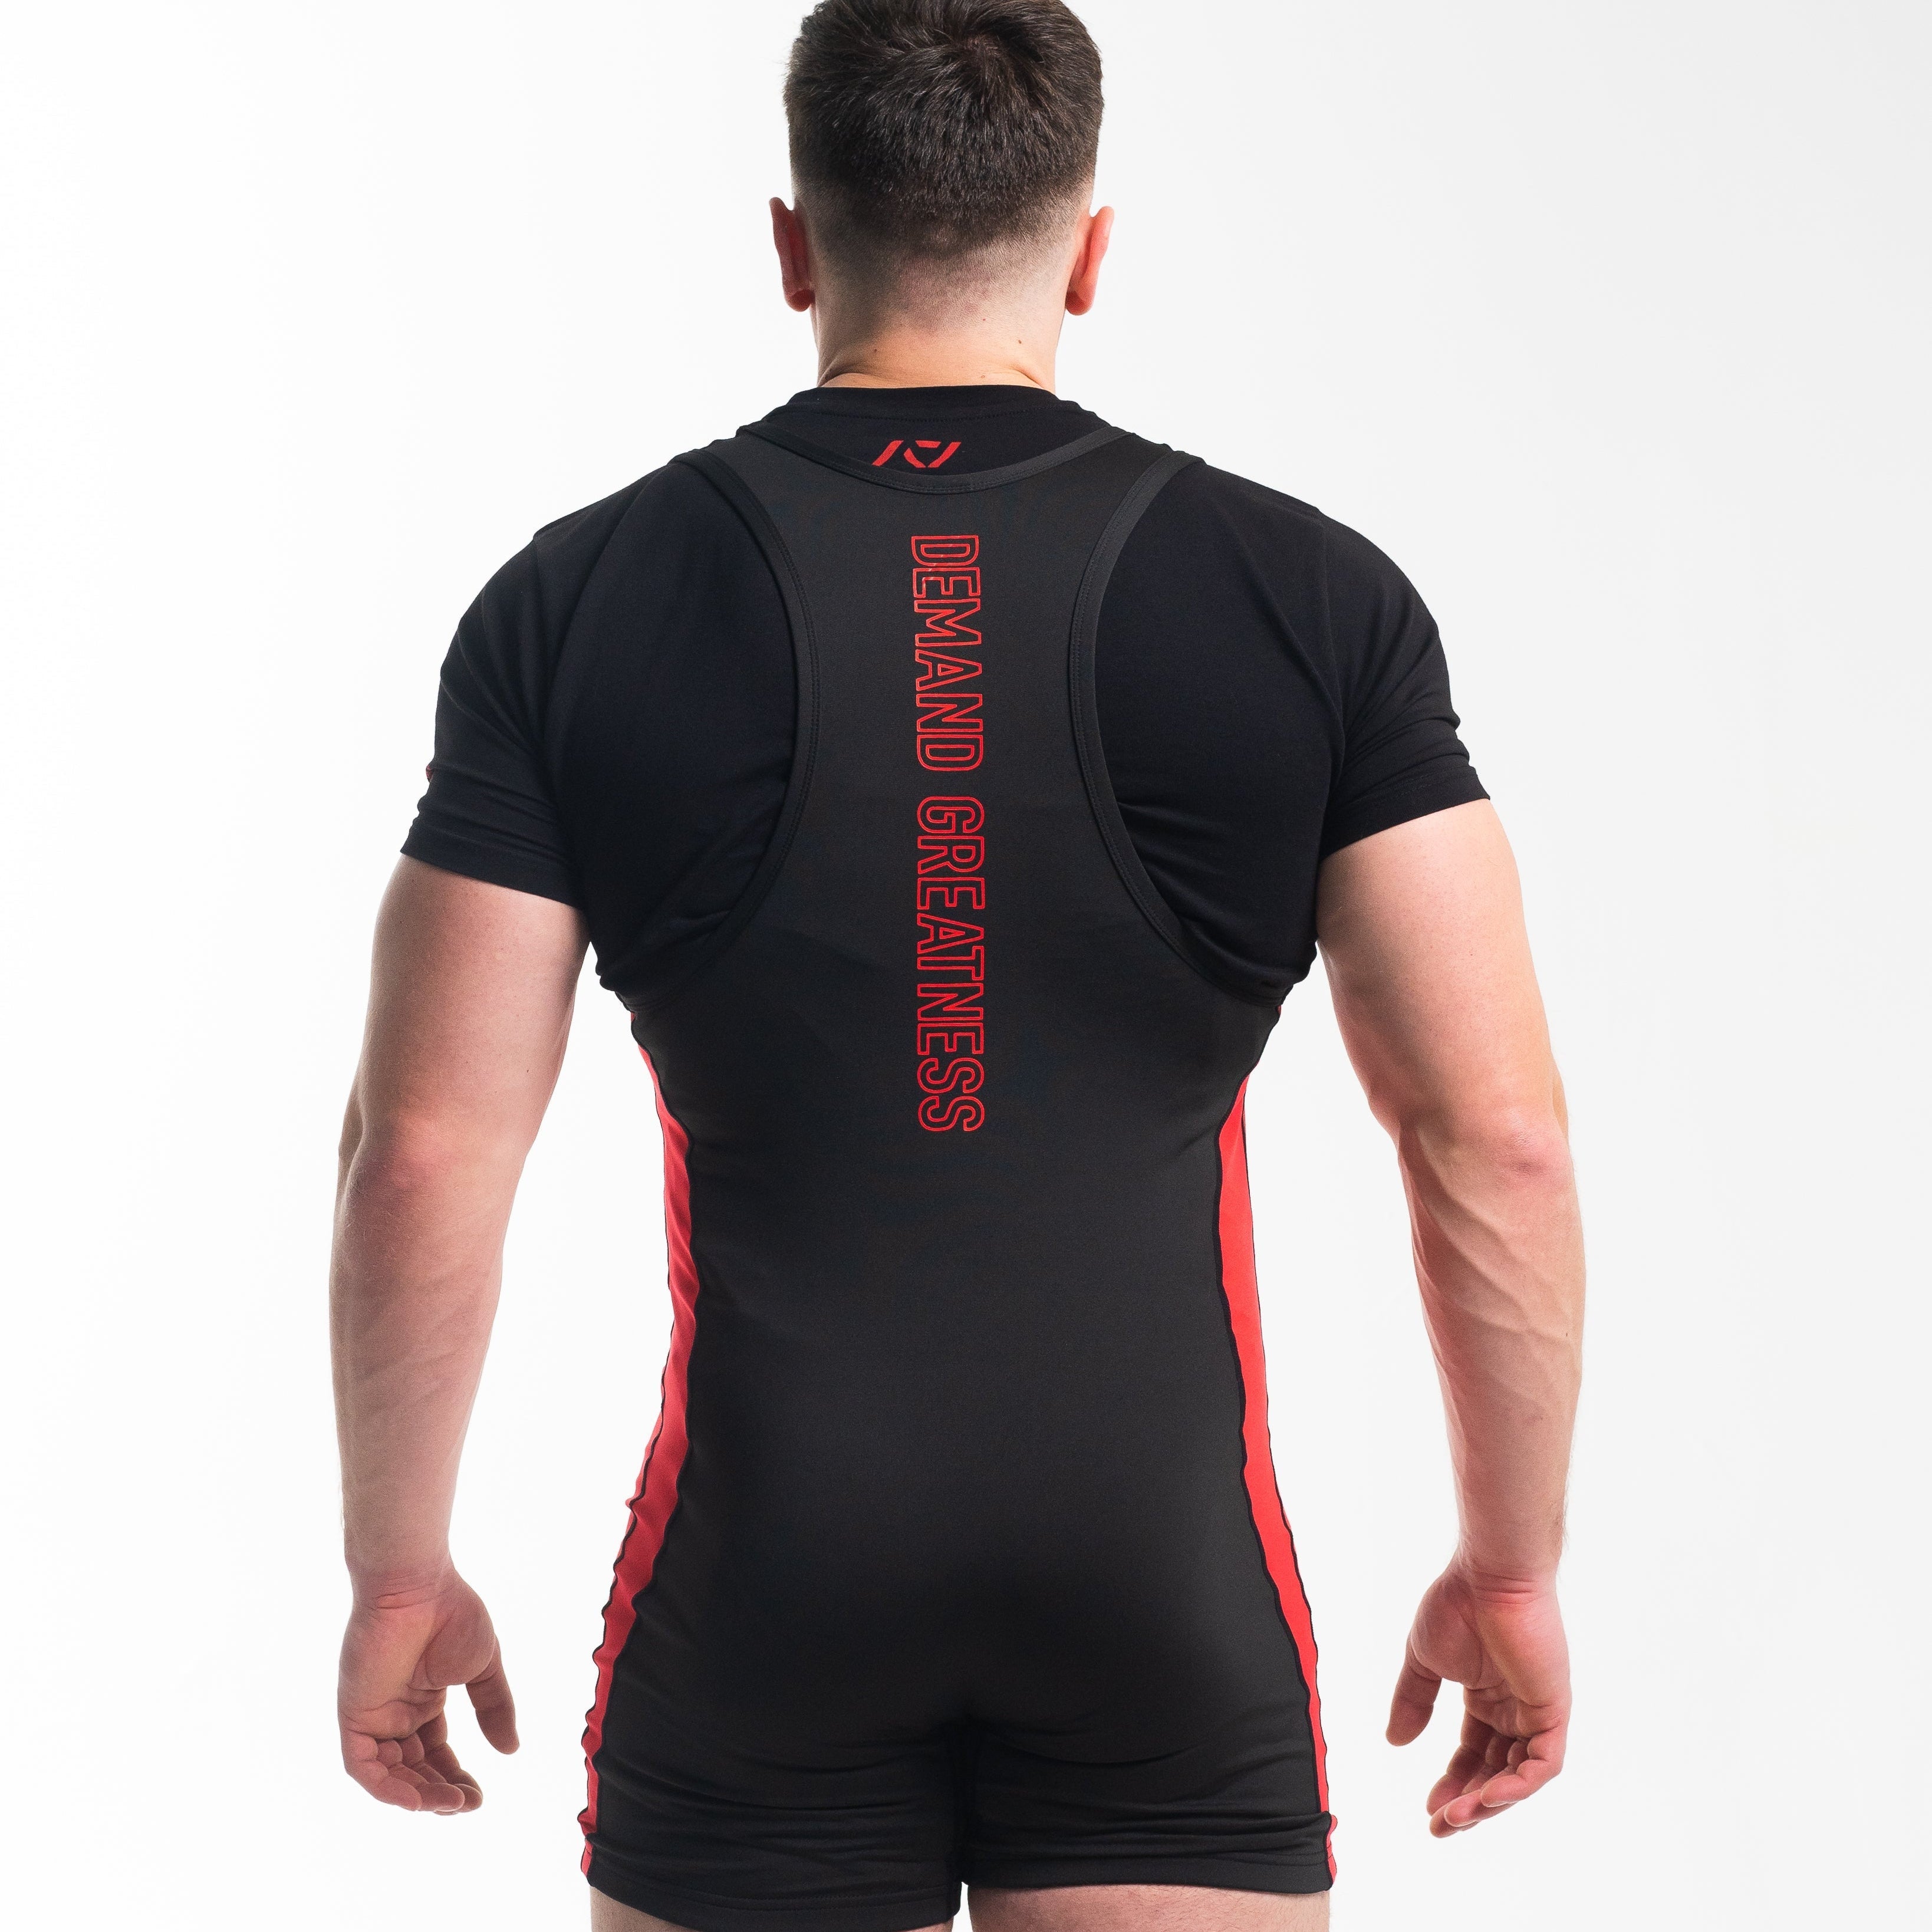 A7 IPF Approved Red Dawn Luno singlet with extra lat mobility, side panel stitching to guide the squat depth level and curved panel design for a slimming look. The Women's singlet features a tapered waist and additional quad room. The IPF Approved Kit includes Powerlifting Singlet, A7 Meet Shirt, A7 Zebra Wrist Wraps, A7 Deadlift Socks, Hourglass Knee Sleeves (Stiff Knee Sleeves and Rigor Mortis Knee Sleeves). Genouillères powerlifting shipping to France, Spain, Ireland, Germany, Italy, Sweden and EU. 